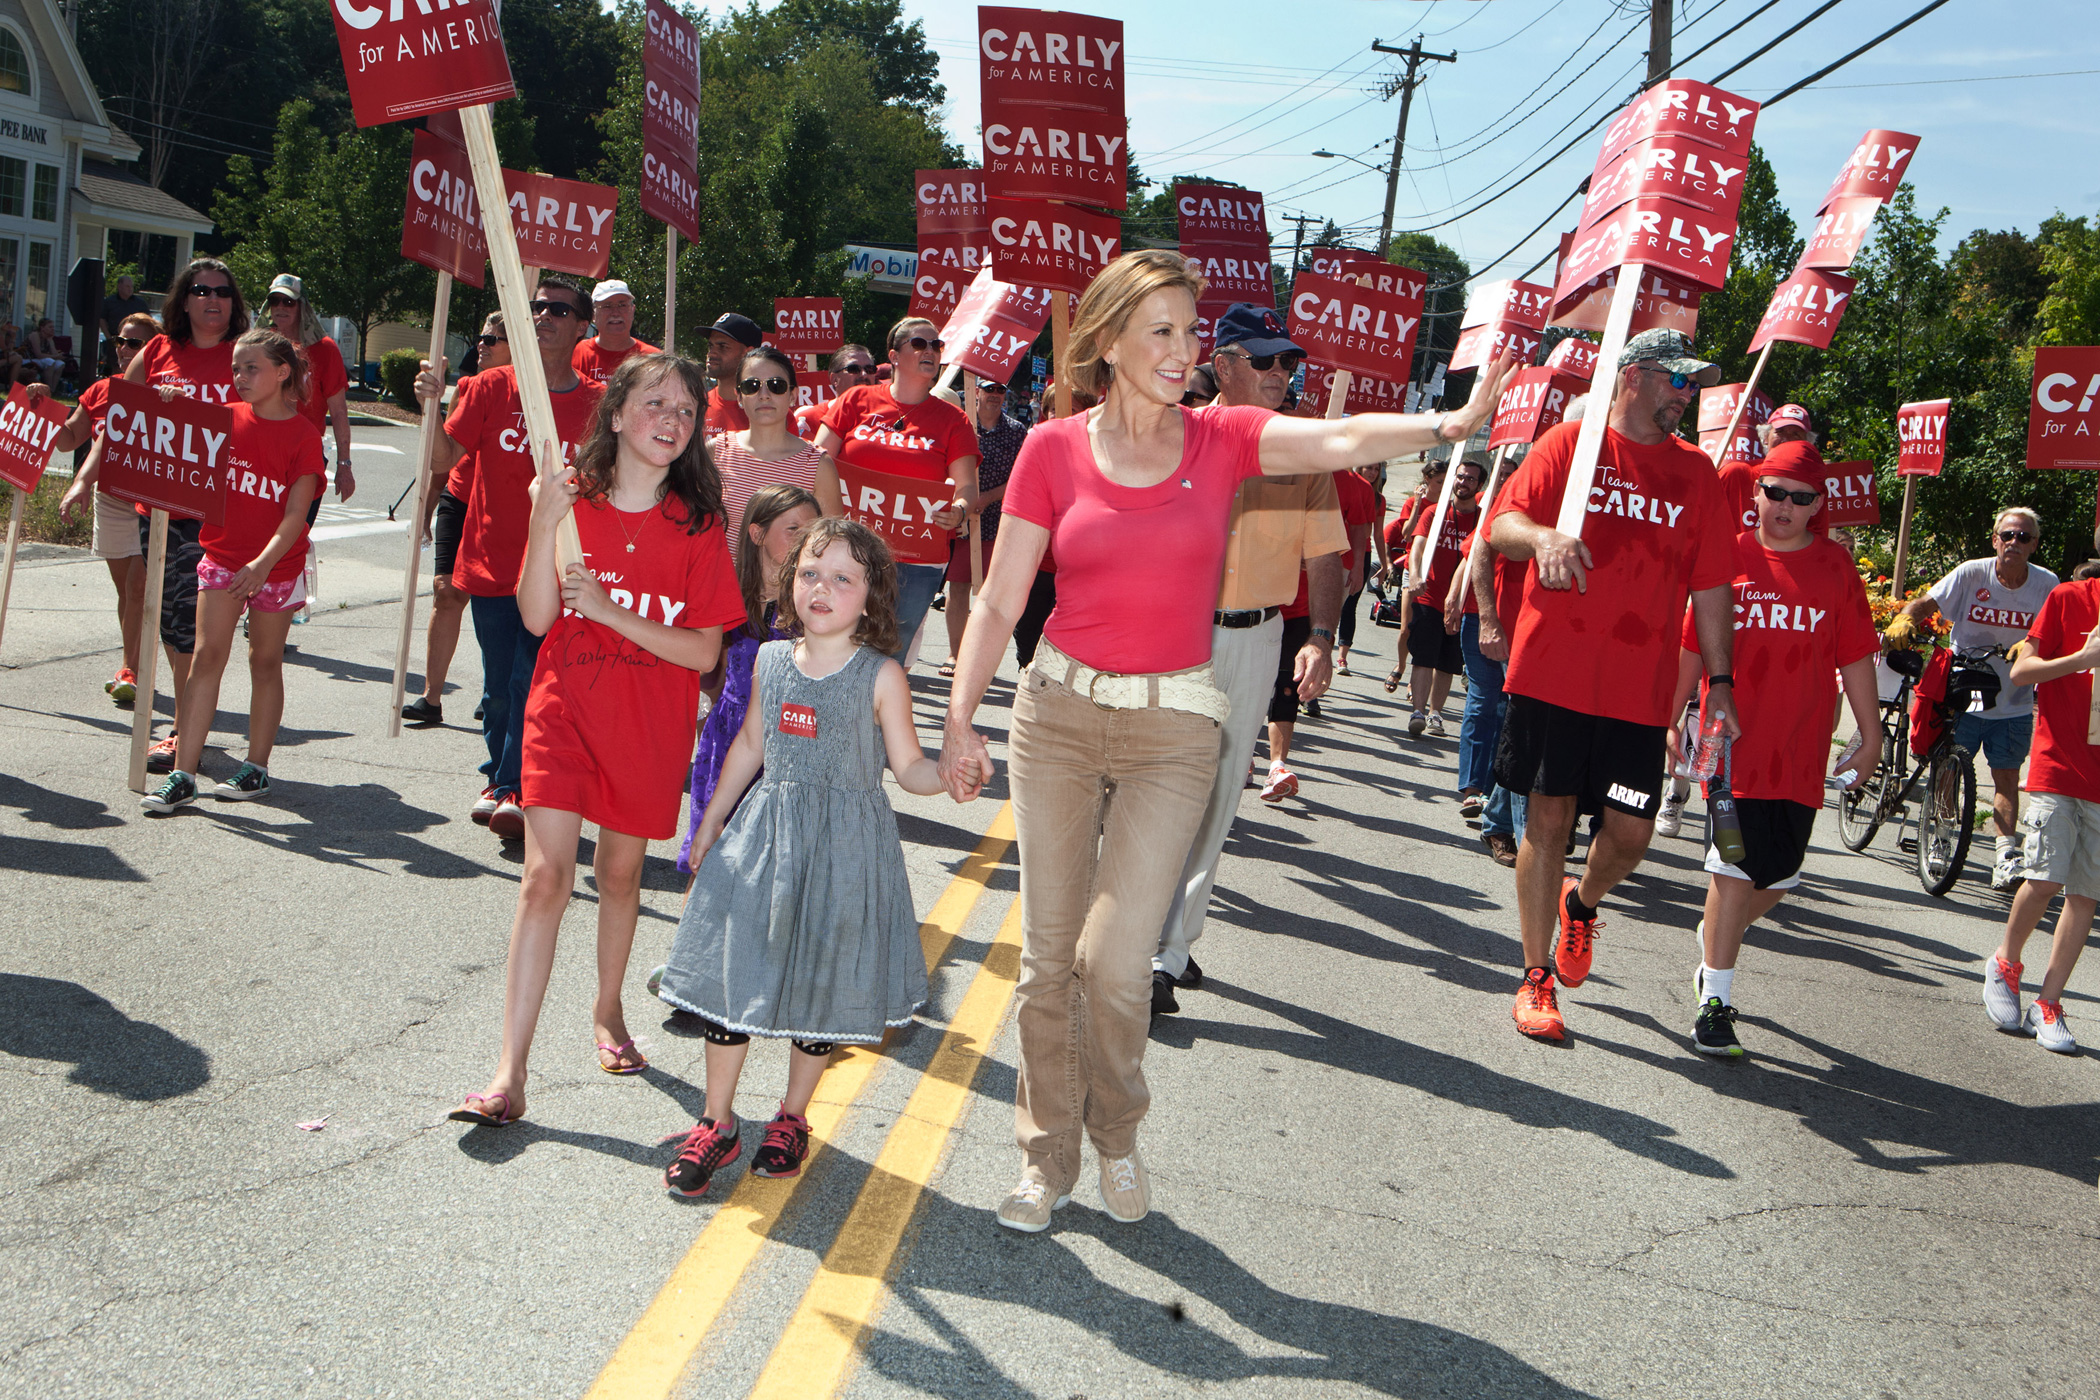 Carly Fiorina marches with her family in the Labor Day parade on Sept. 7, 2015 in Milford, N.H.